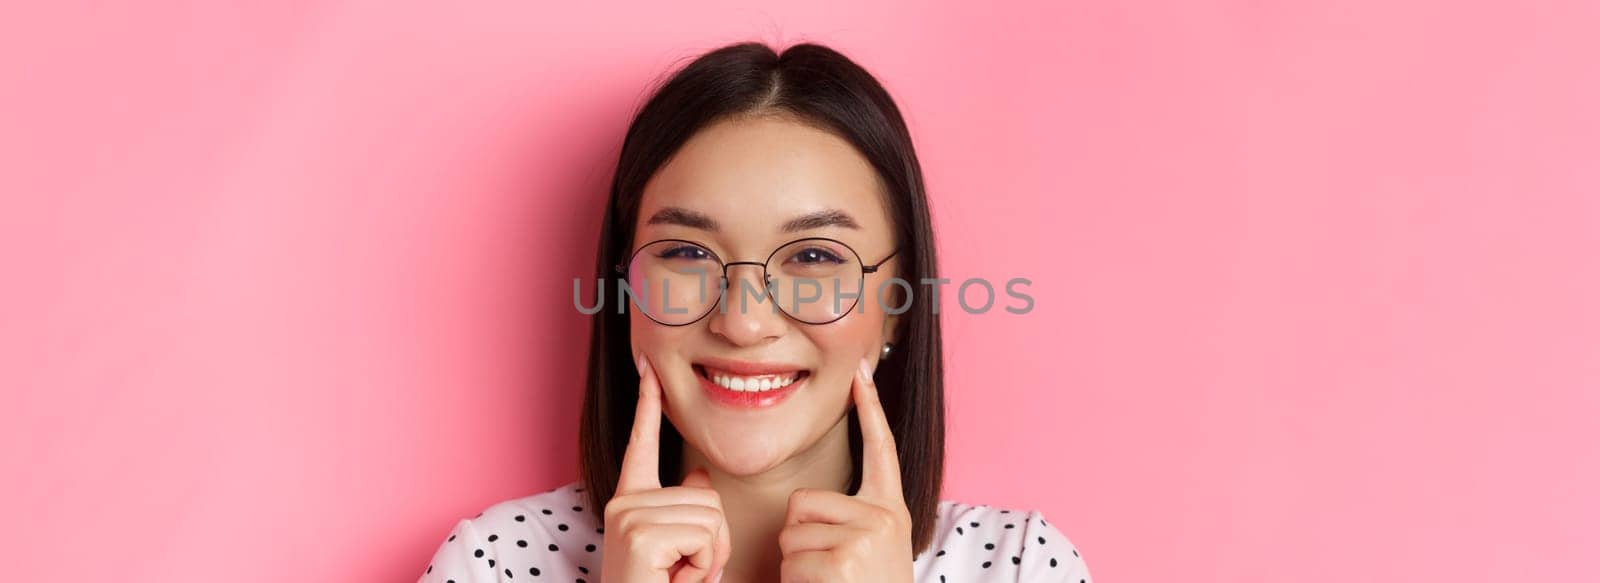 Beauty concept. Headshot of adorable asian girl in trendy glasses smiling, poking cheeks and showing cute dimples, standing over pink background.